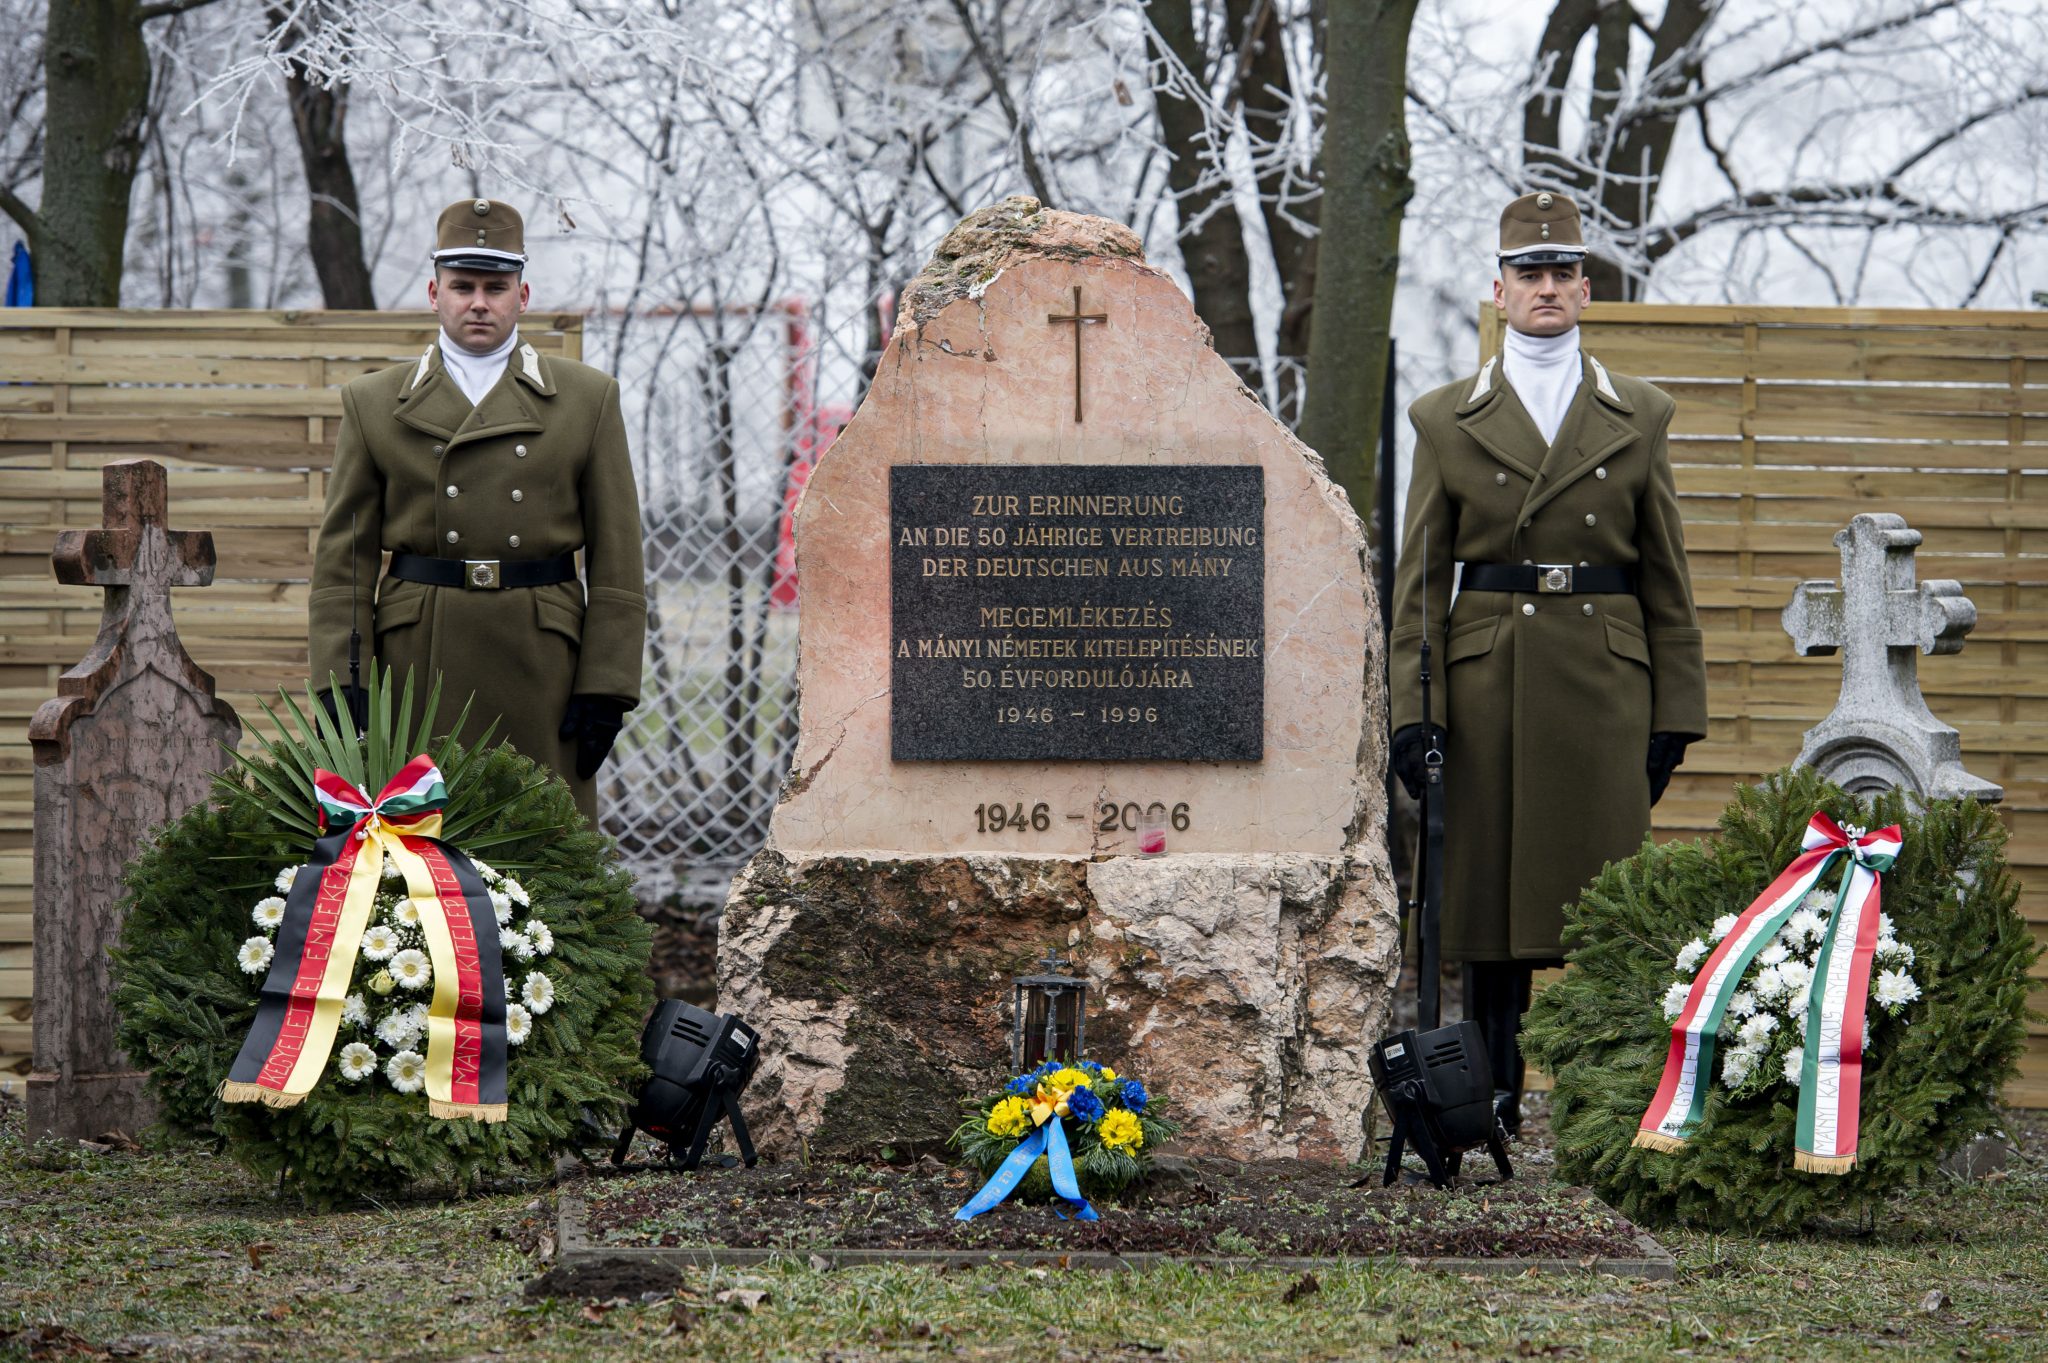 Ethnic Germans Deported after WW2 Commemorated